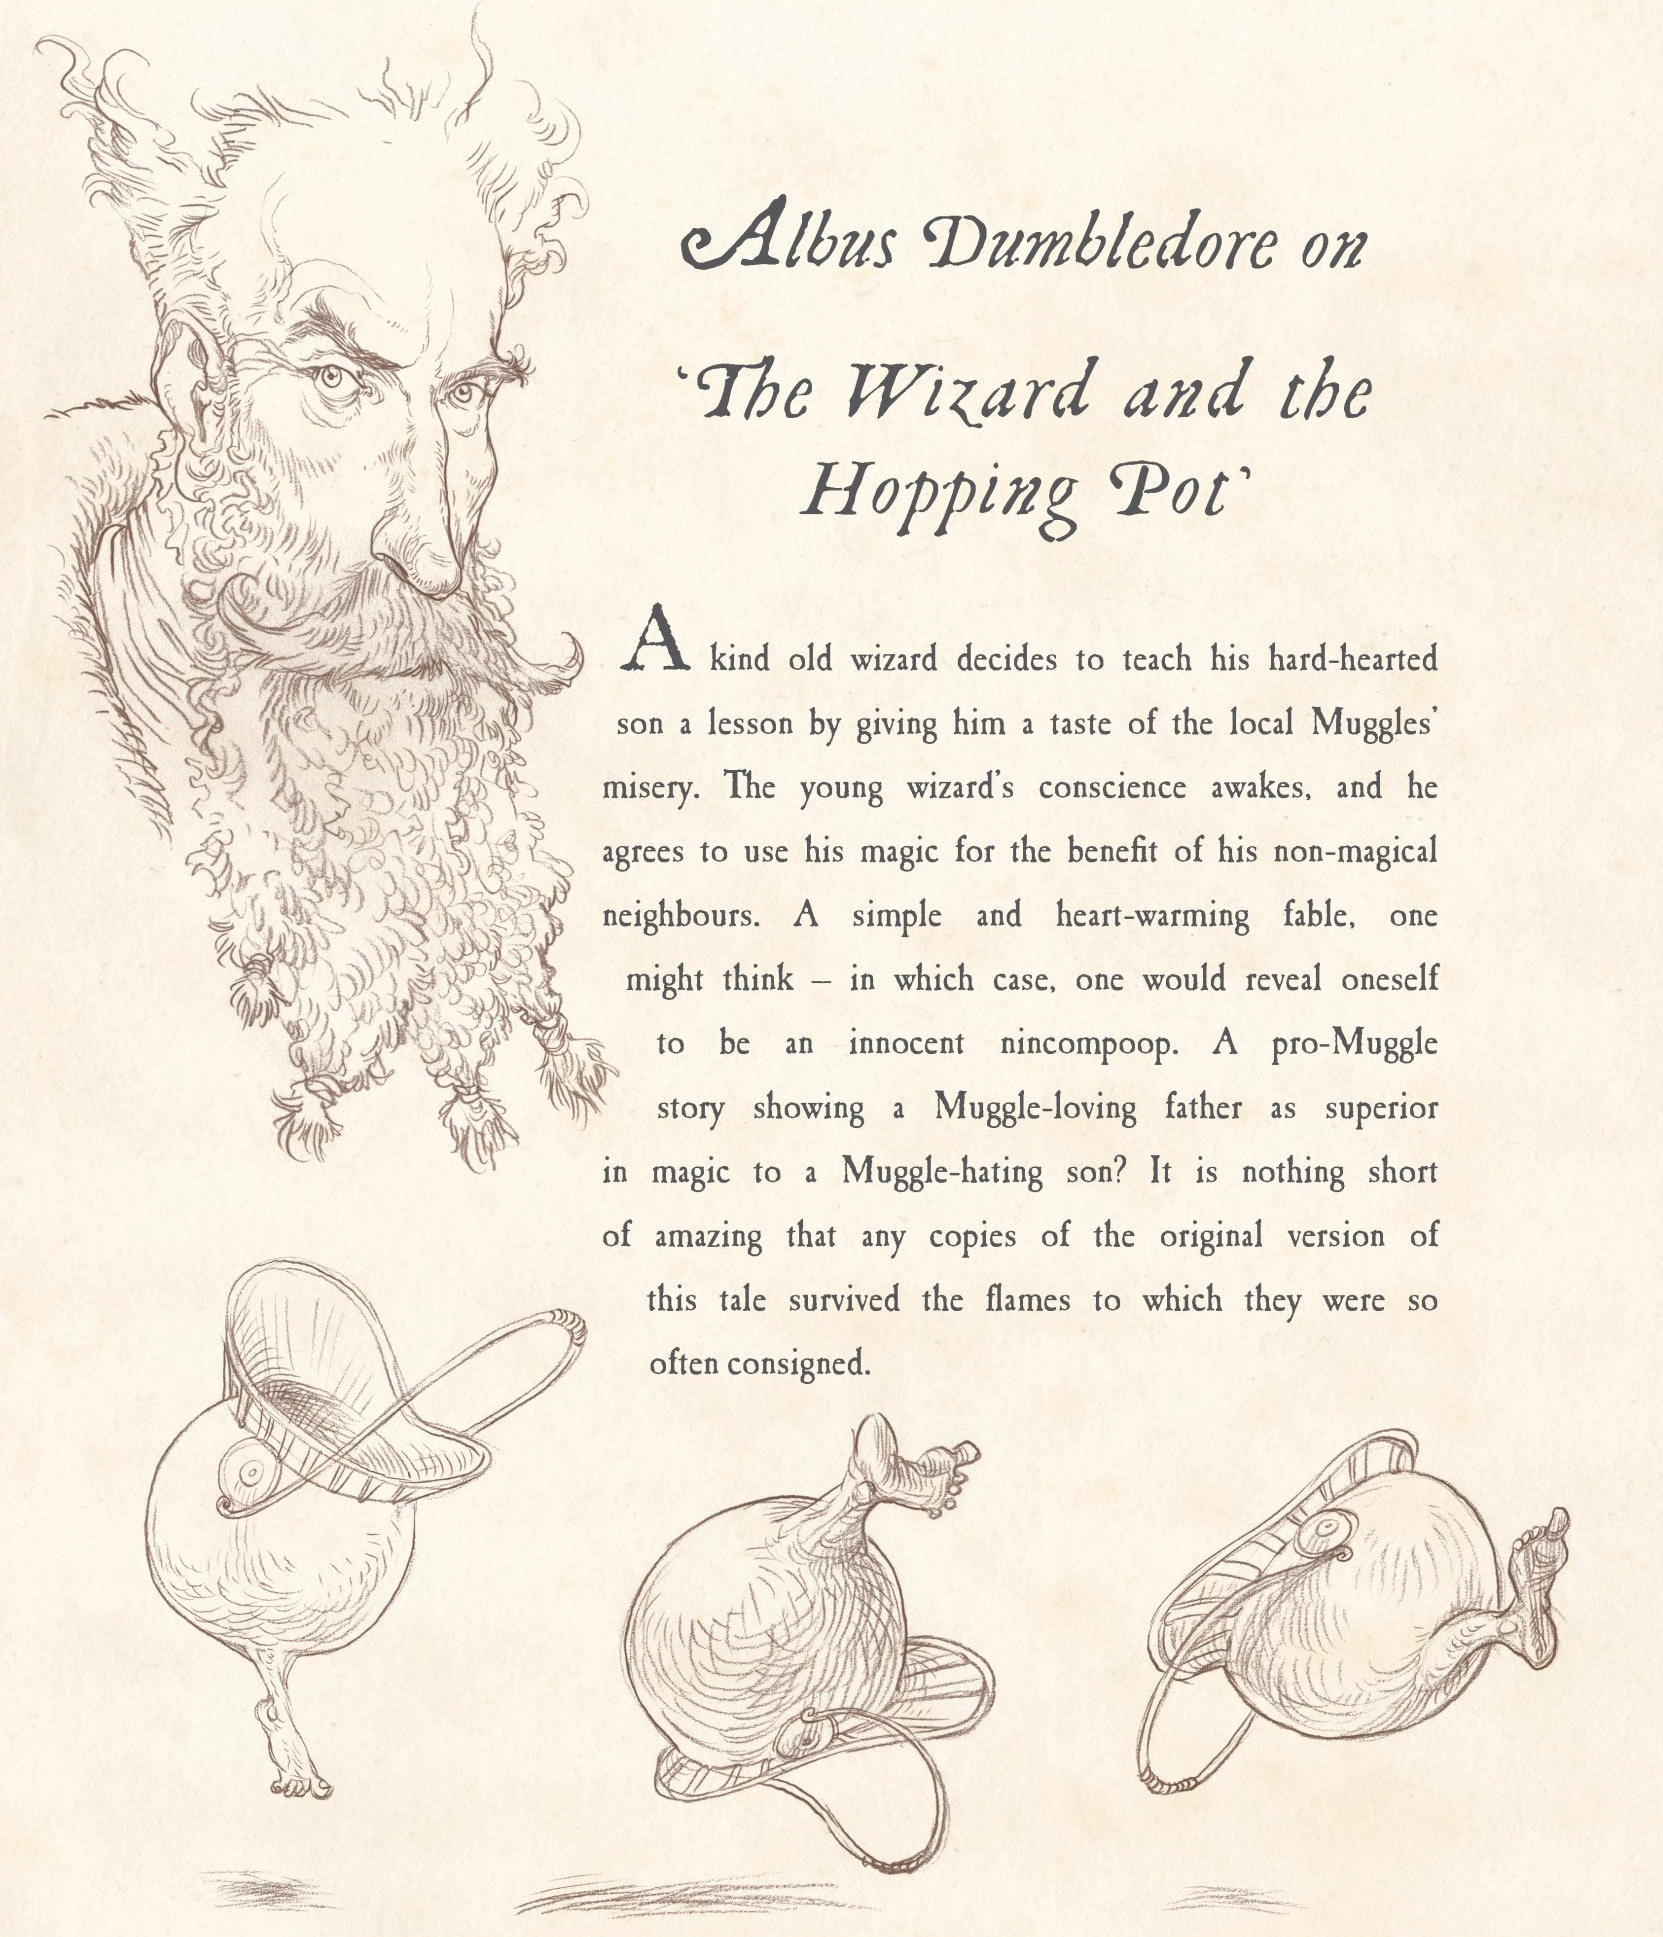 The Wizard and the Hopping Pot (Chris Riddell)